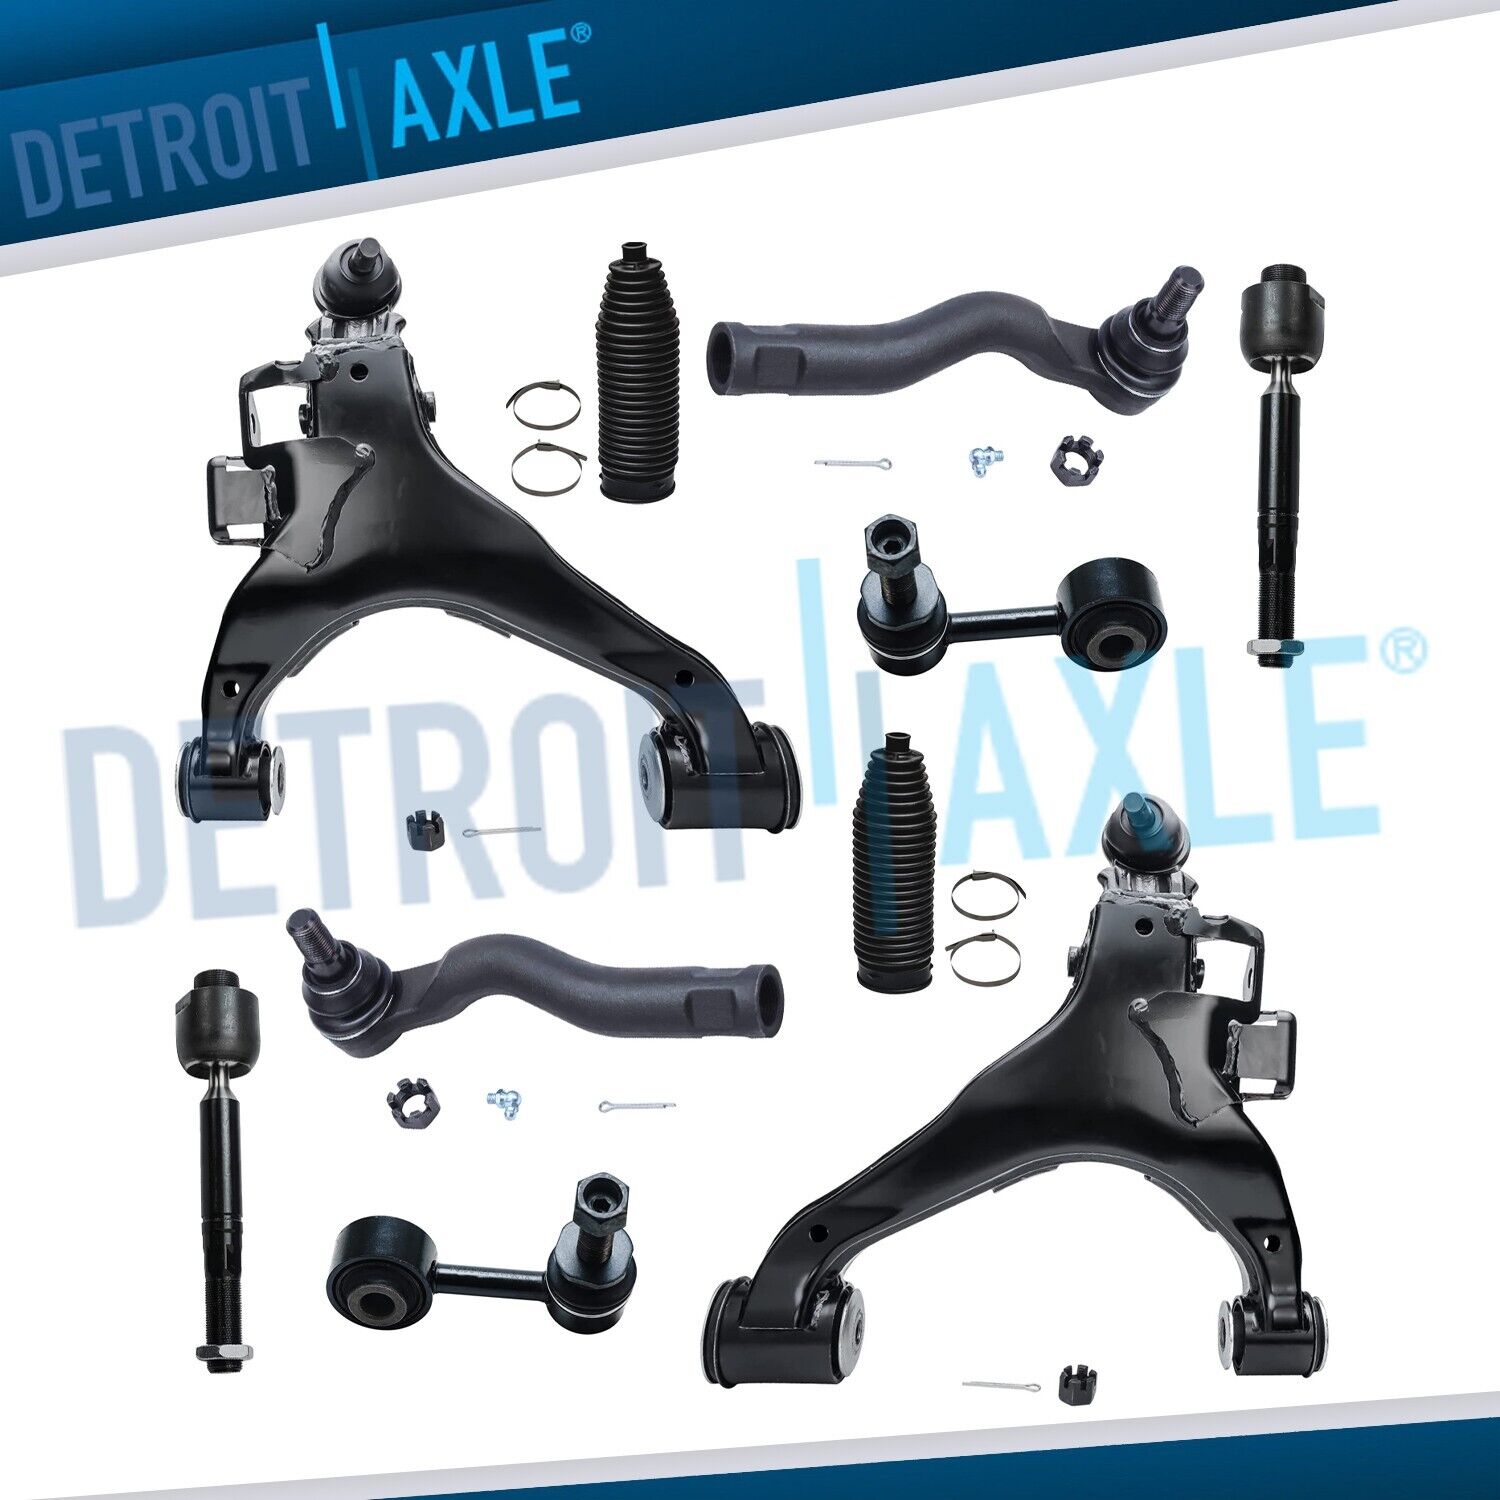 For 2008 - 2019 Toyota Sequoia Tundra Front Lower Control Arms Tierods Sway Bars